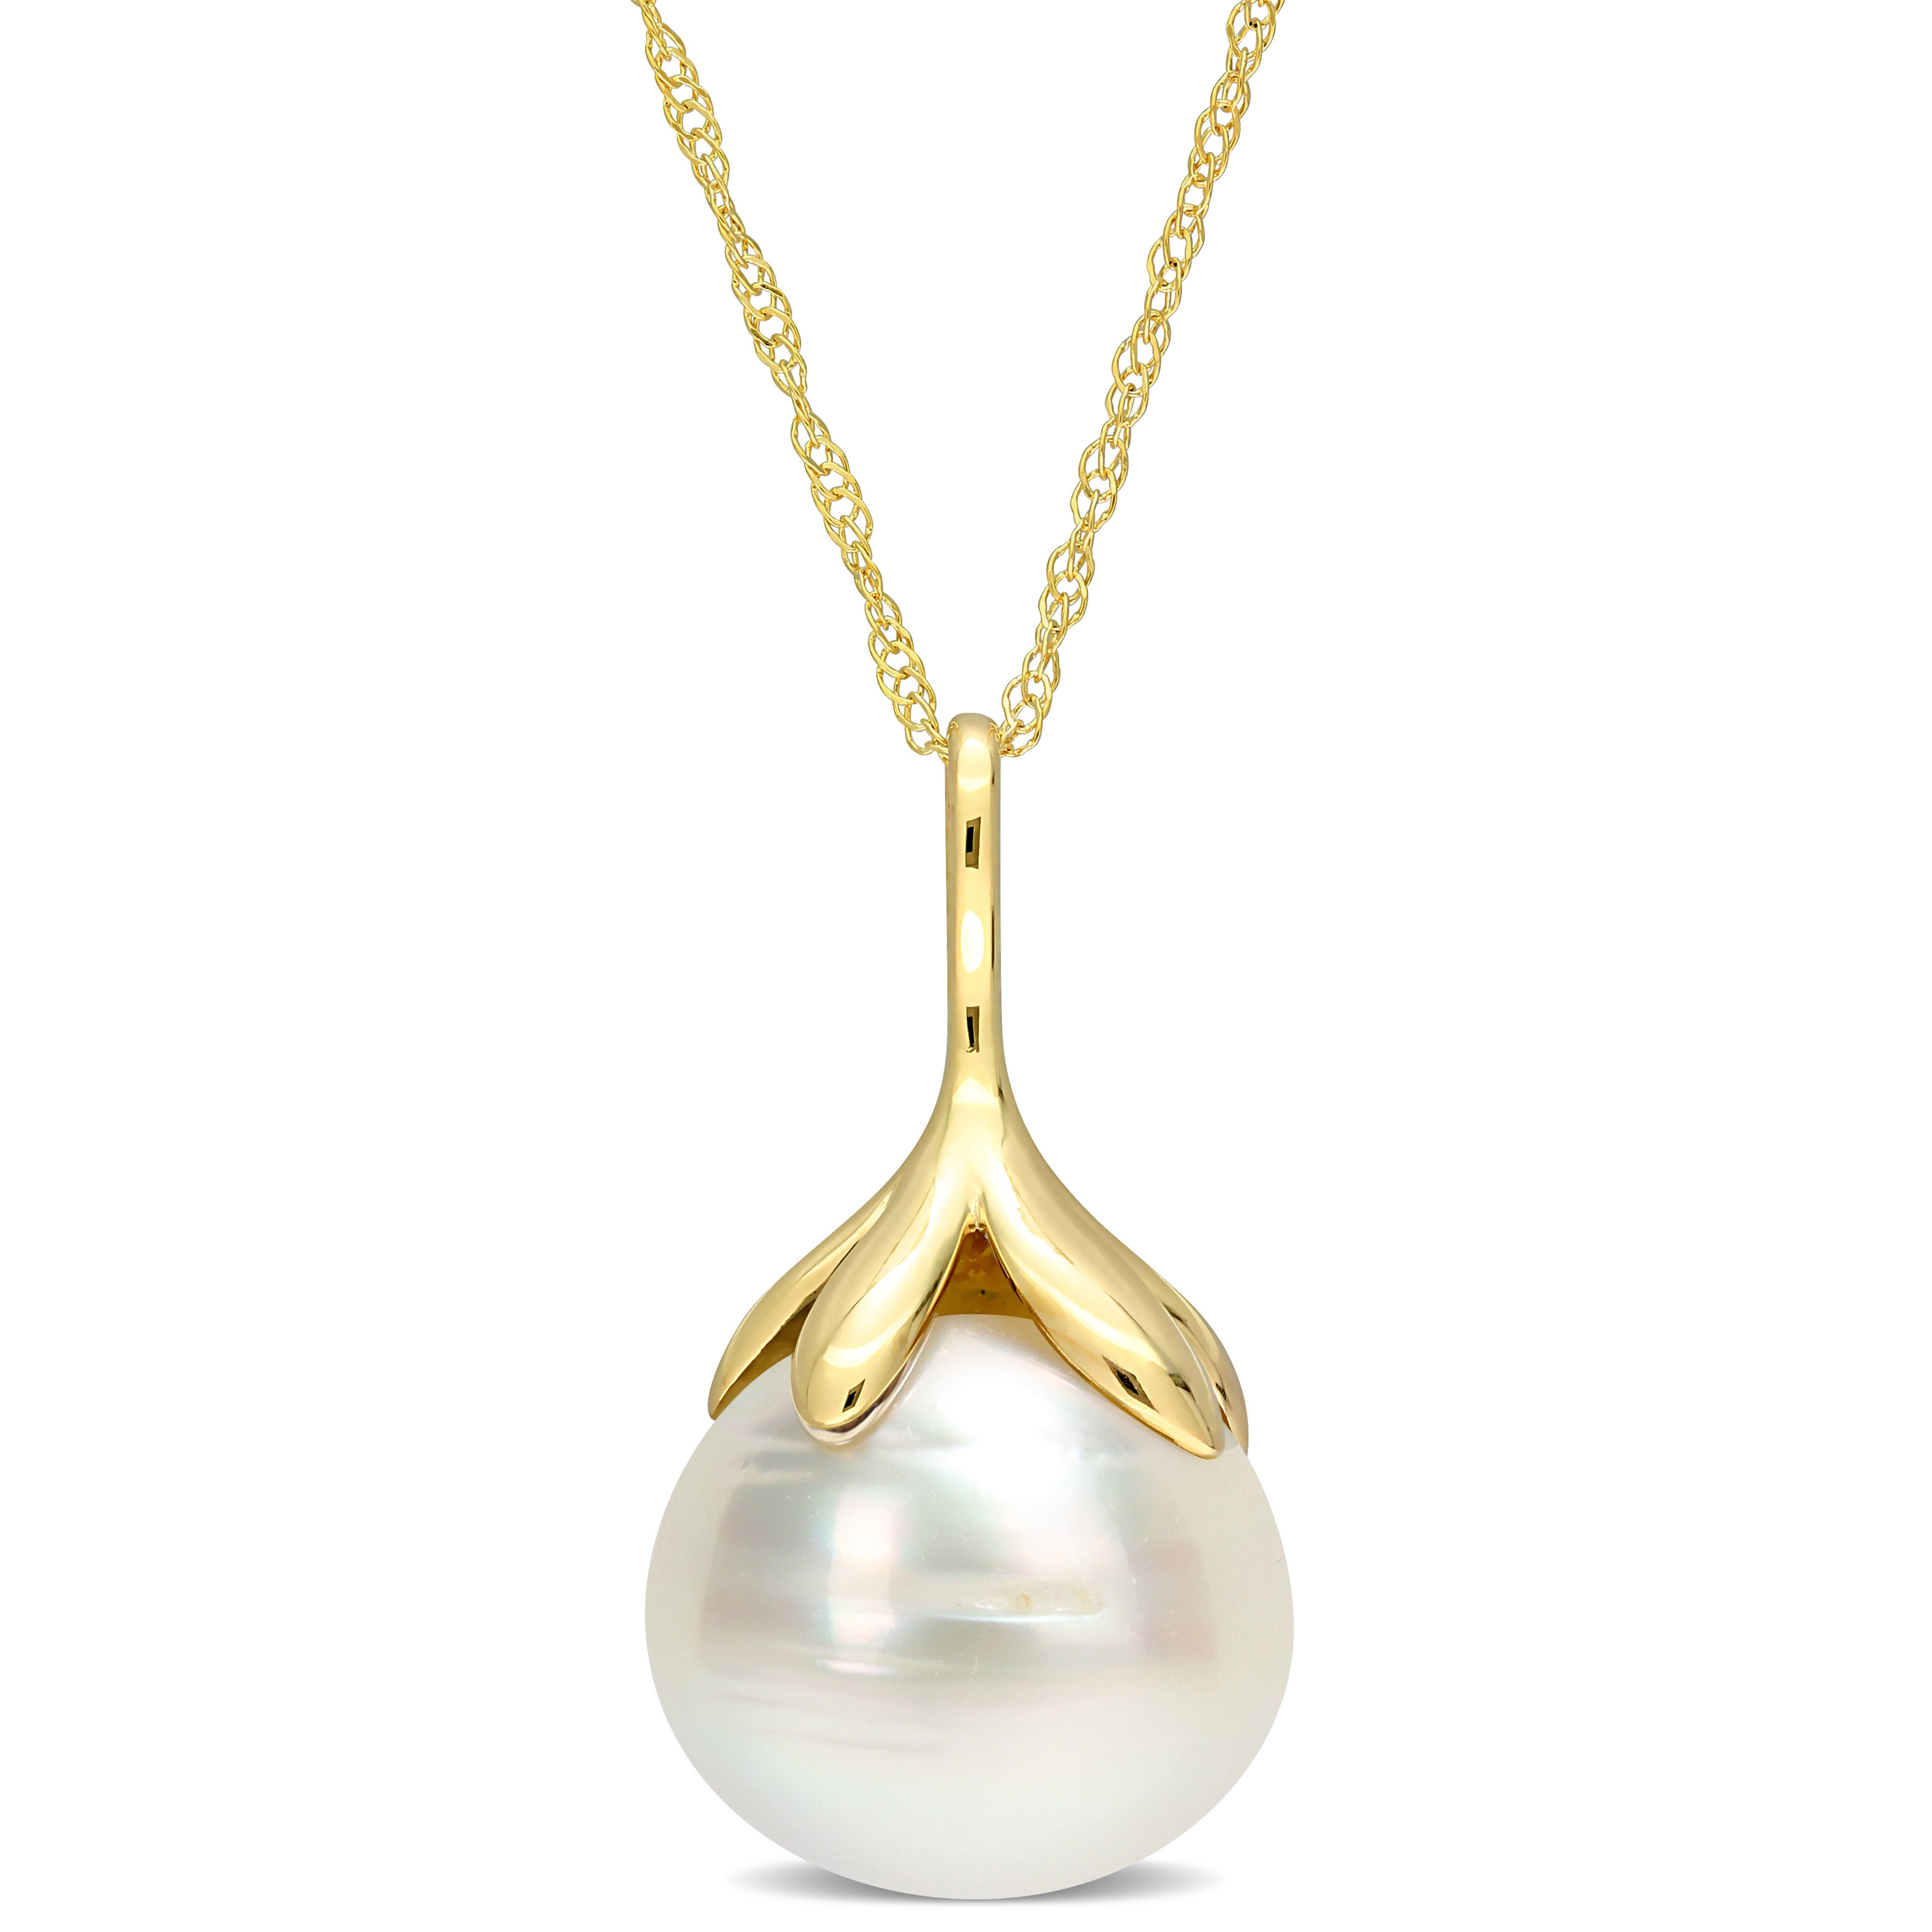 10-11 MM South Sea Cultured Pearl Pendant with Chain in 14k Yellow Gold